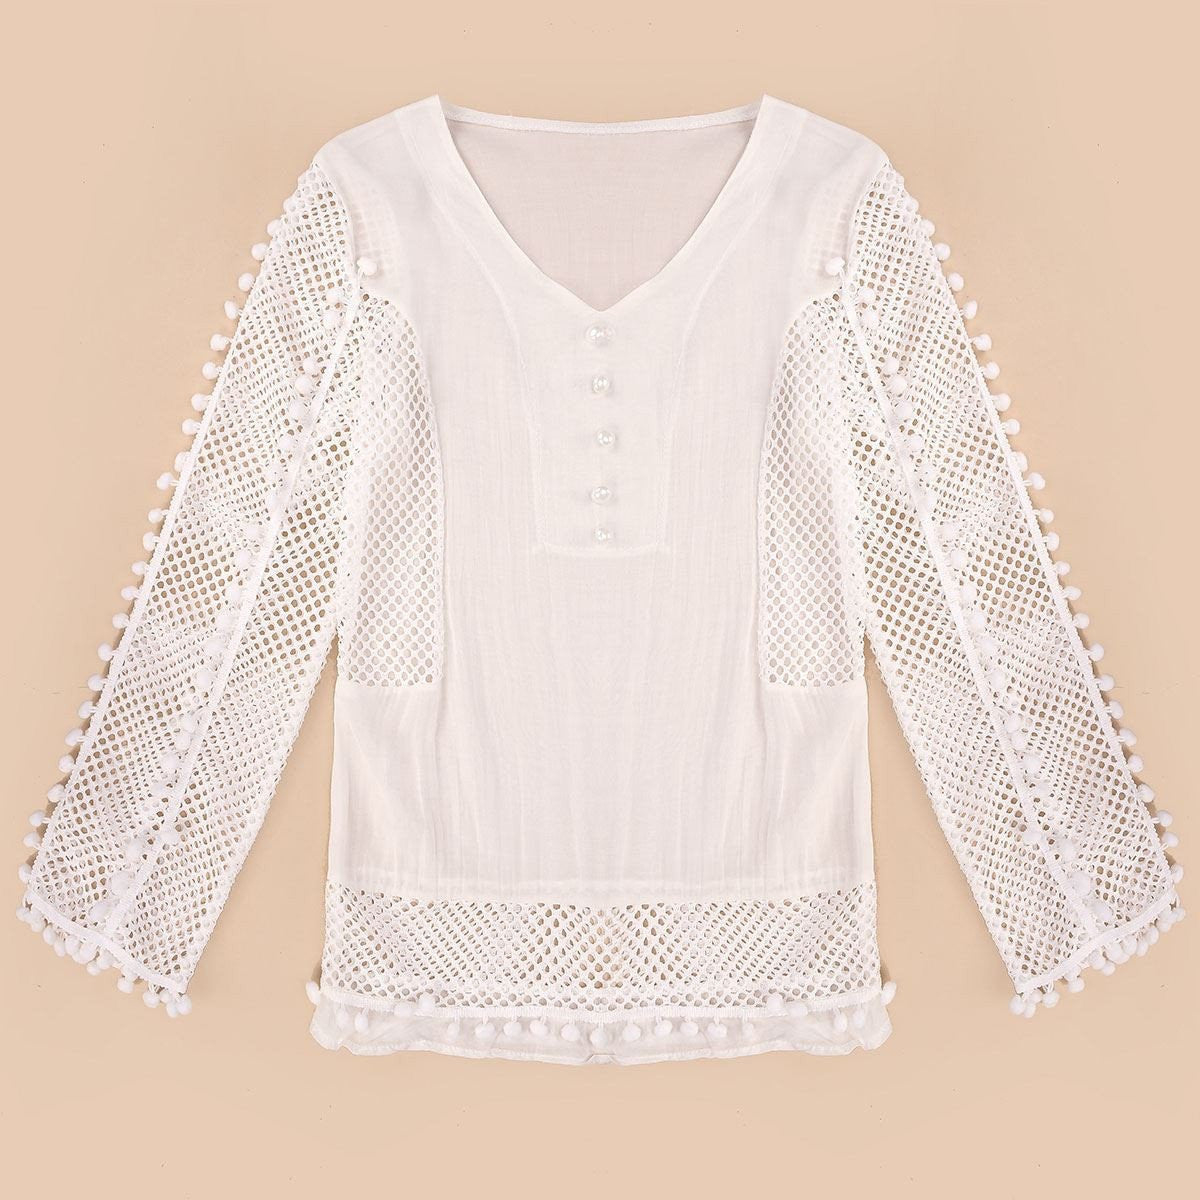 Lace Chiffon Blouse Women V-neck 3/4 Sleeve Hollow Out White Shirts Casual Loose Tops Plus Size S-3XL